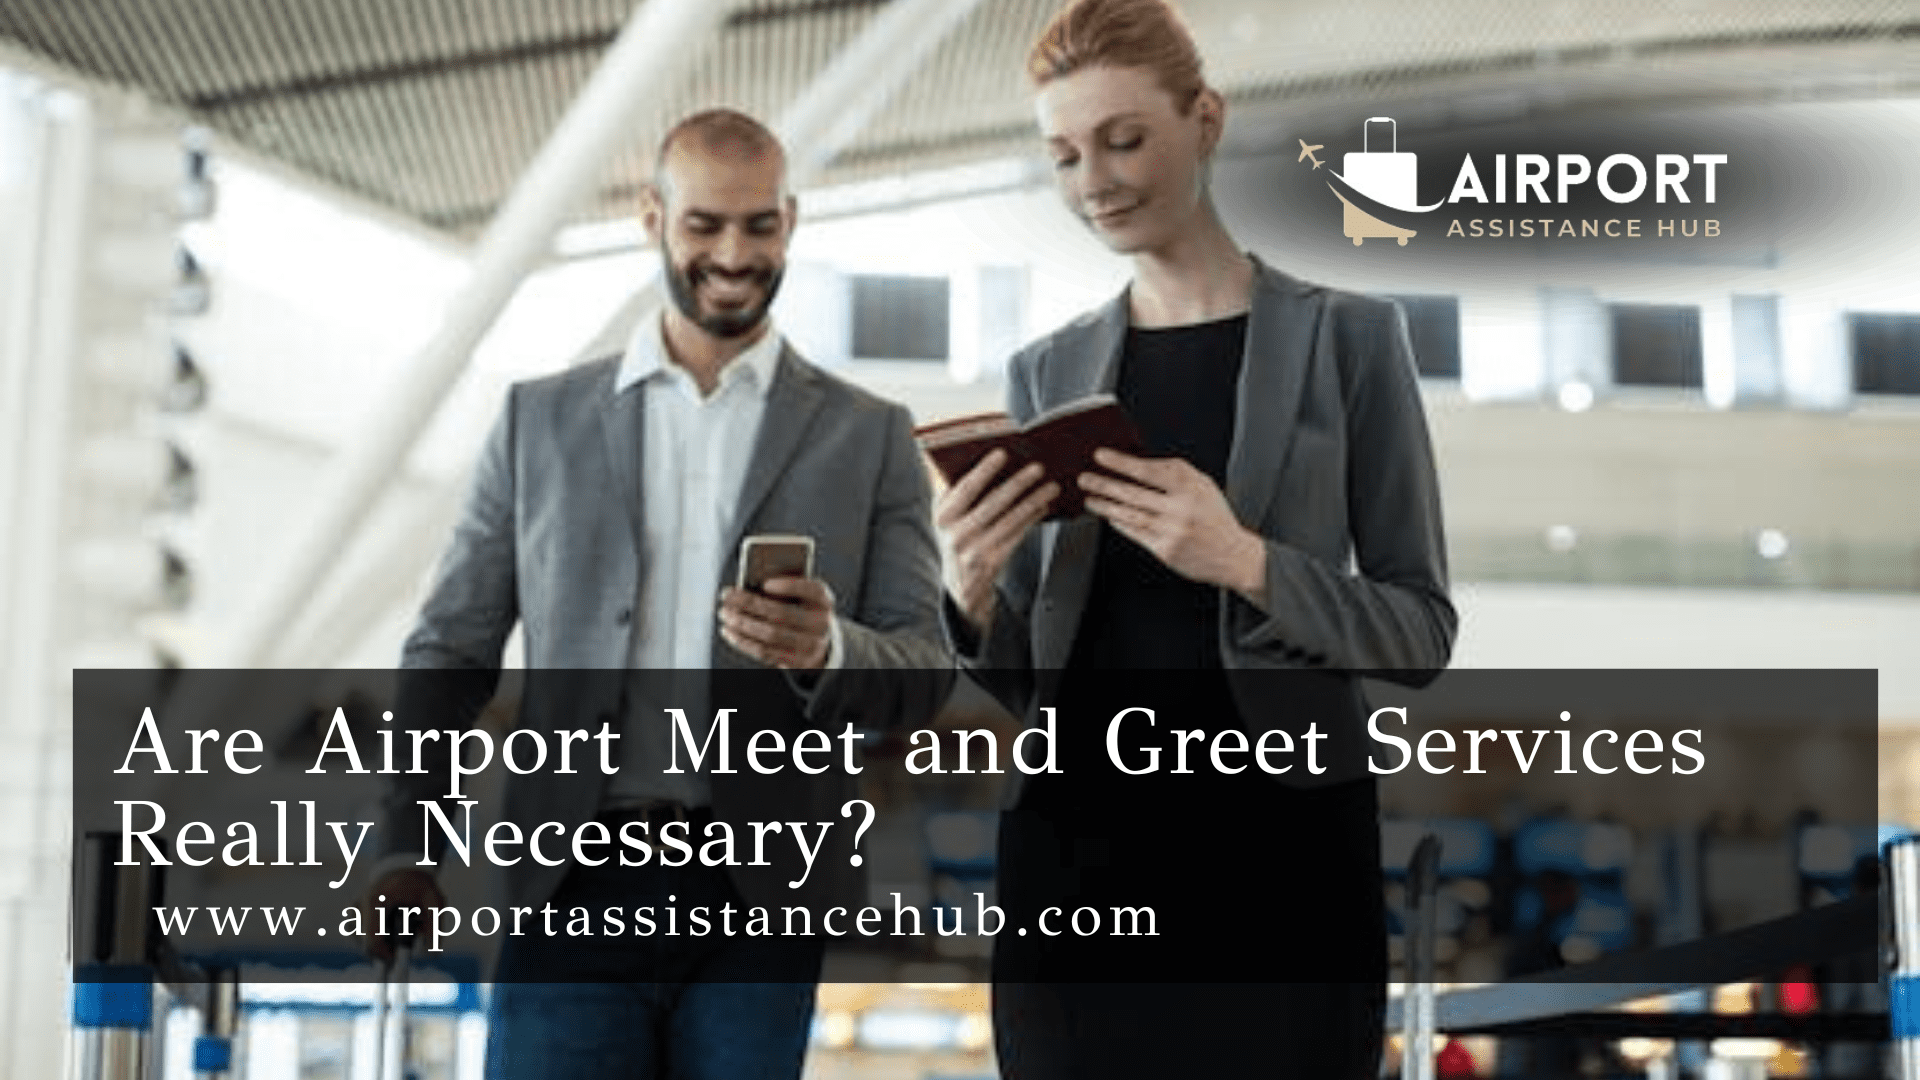 Are Airport Meet and Greet Services Really Necessary?